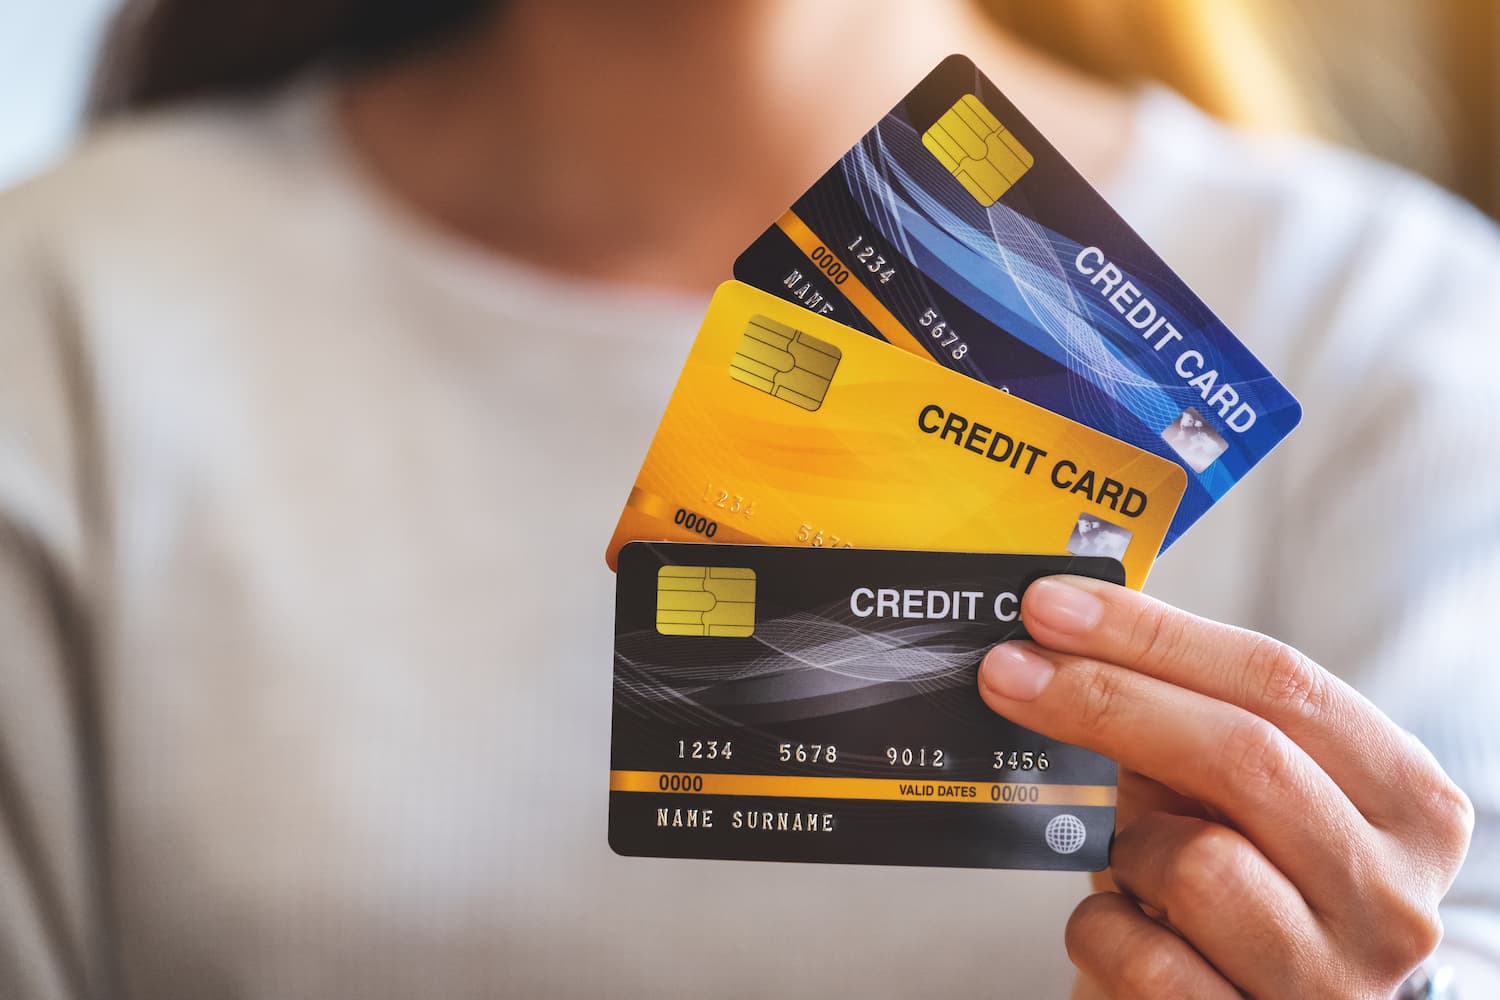 Best Credit Cards (For Travel, Transfer Balance, Students, +More)